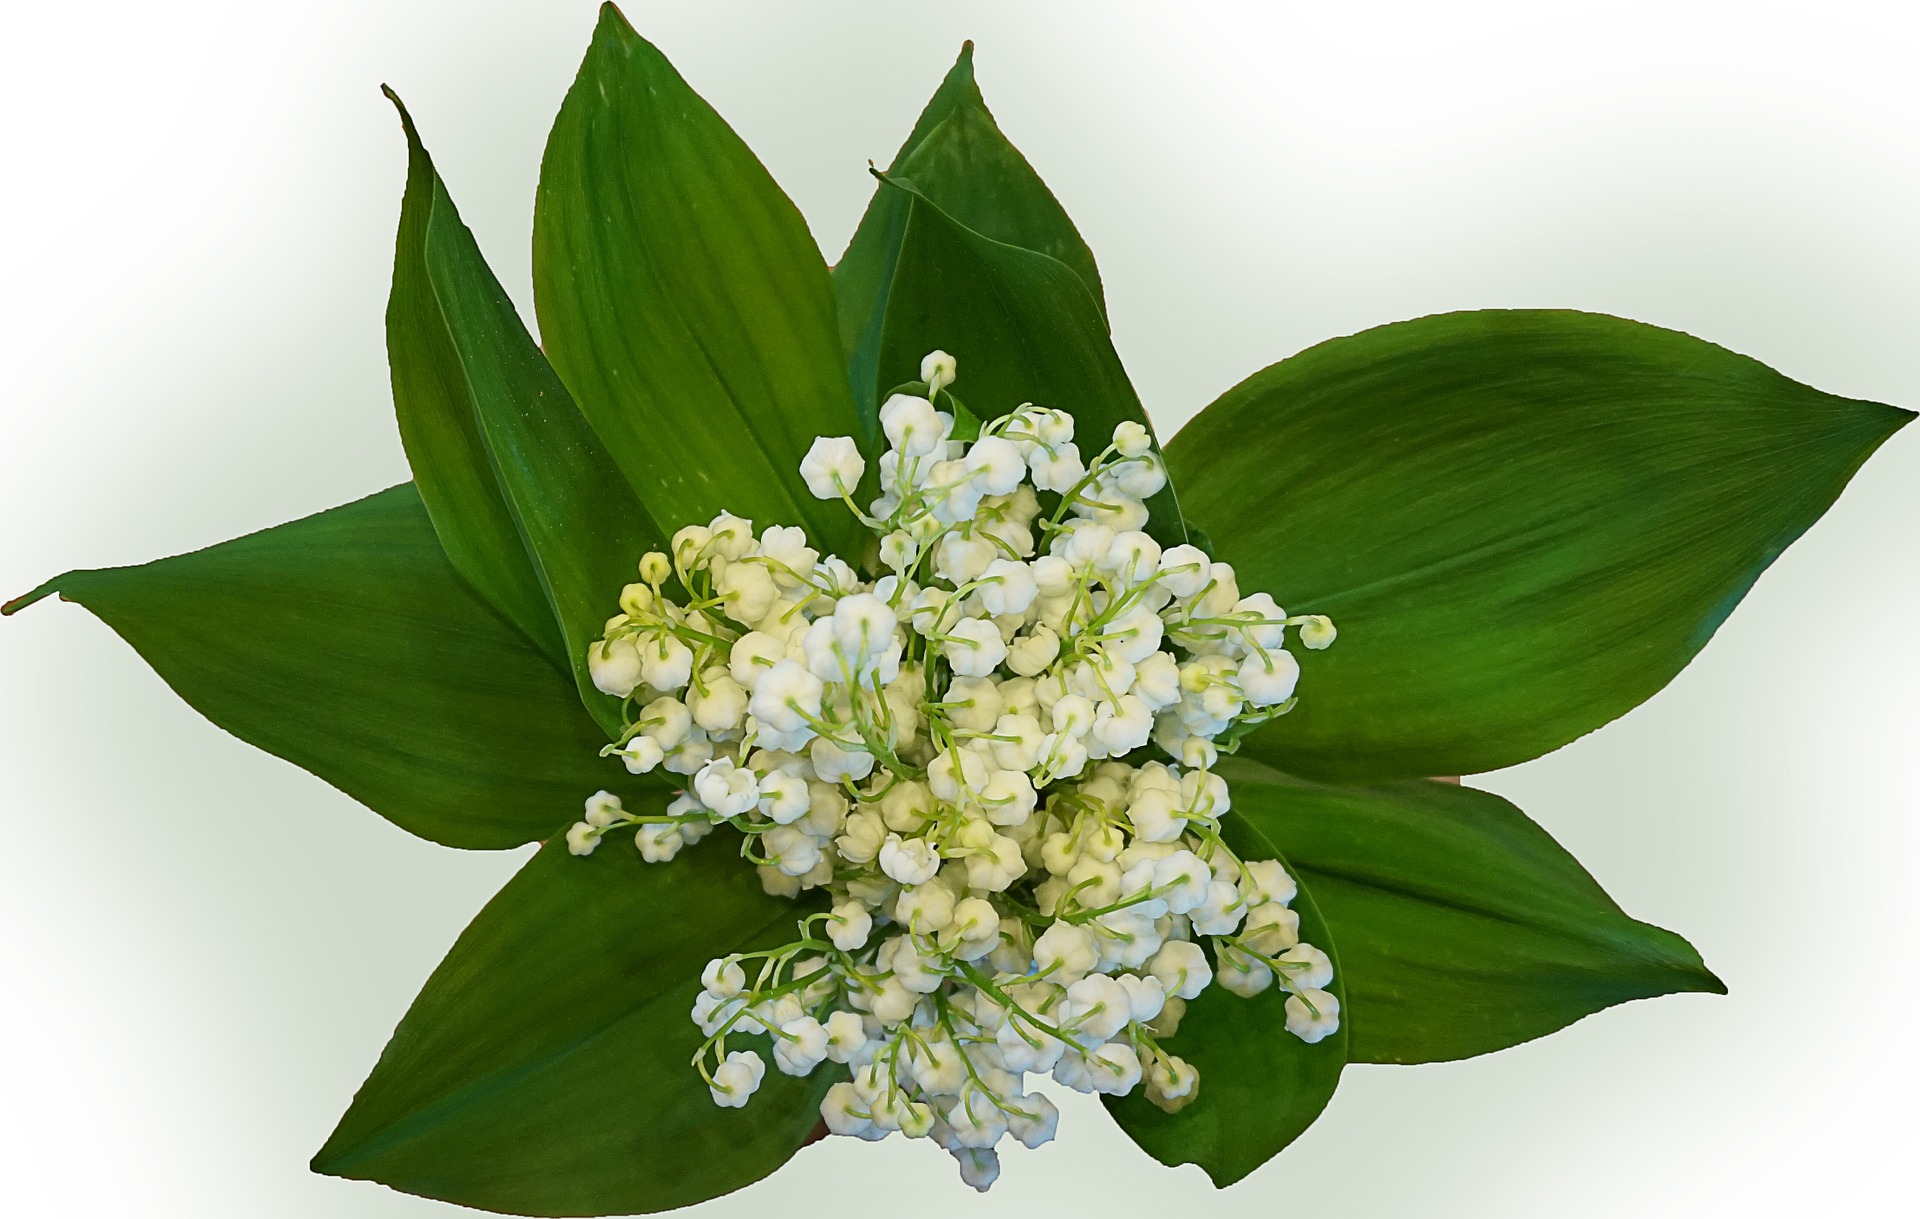 lily-of-the-valley-771108_1920